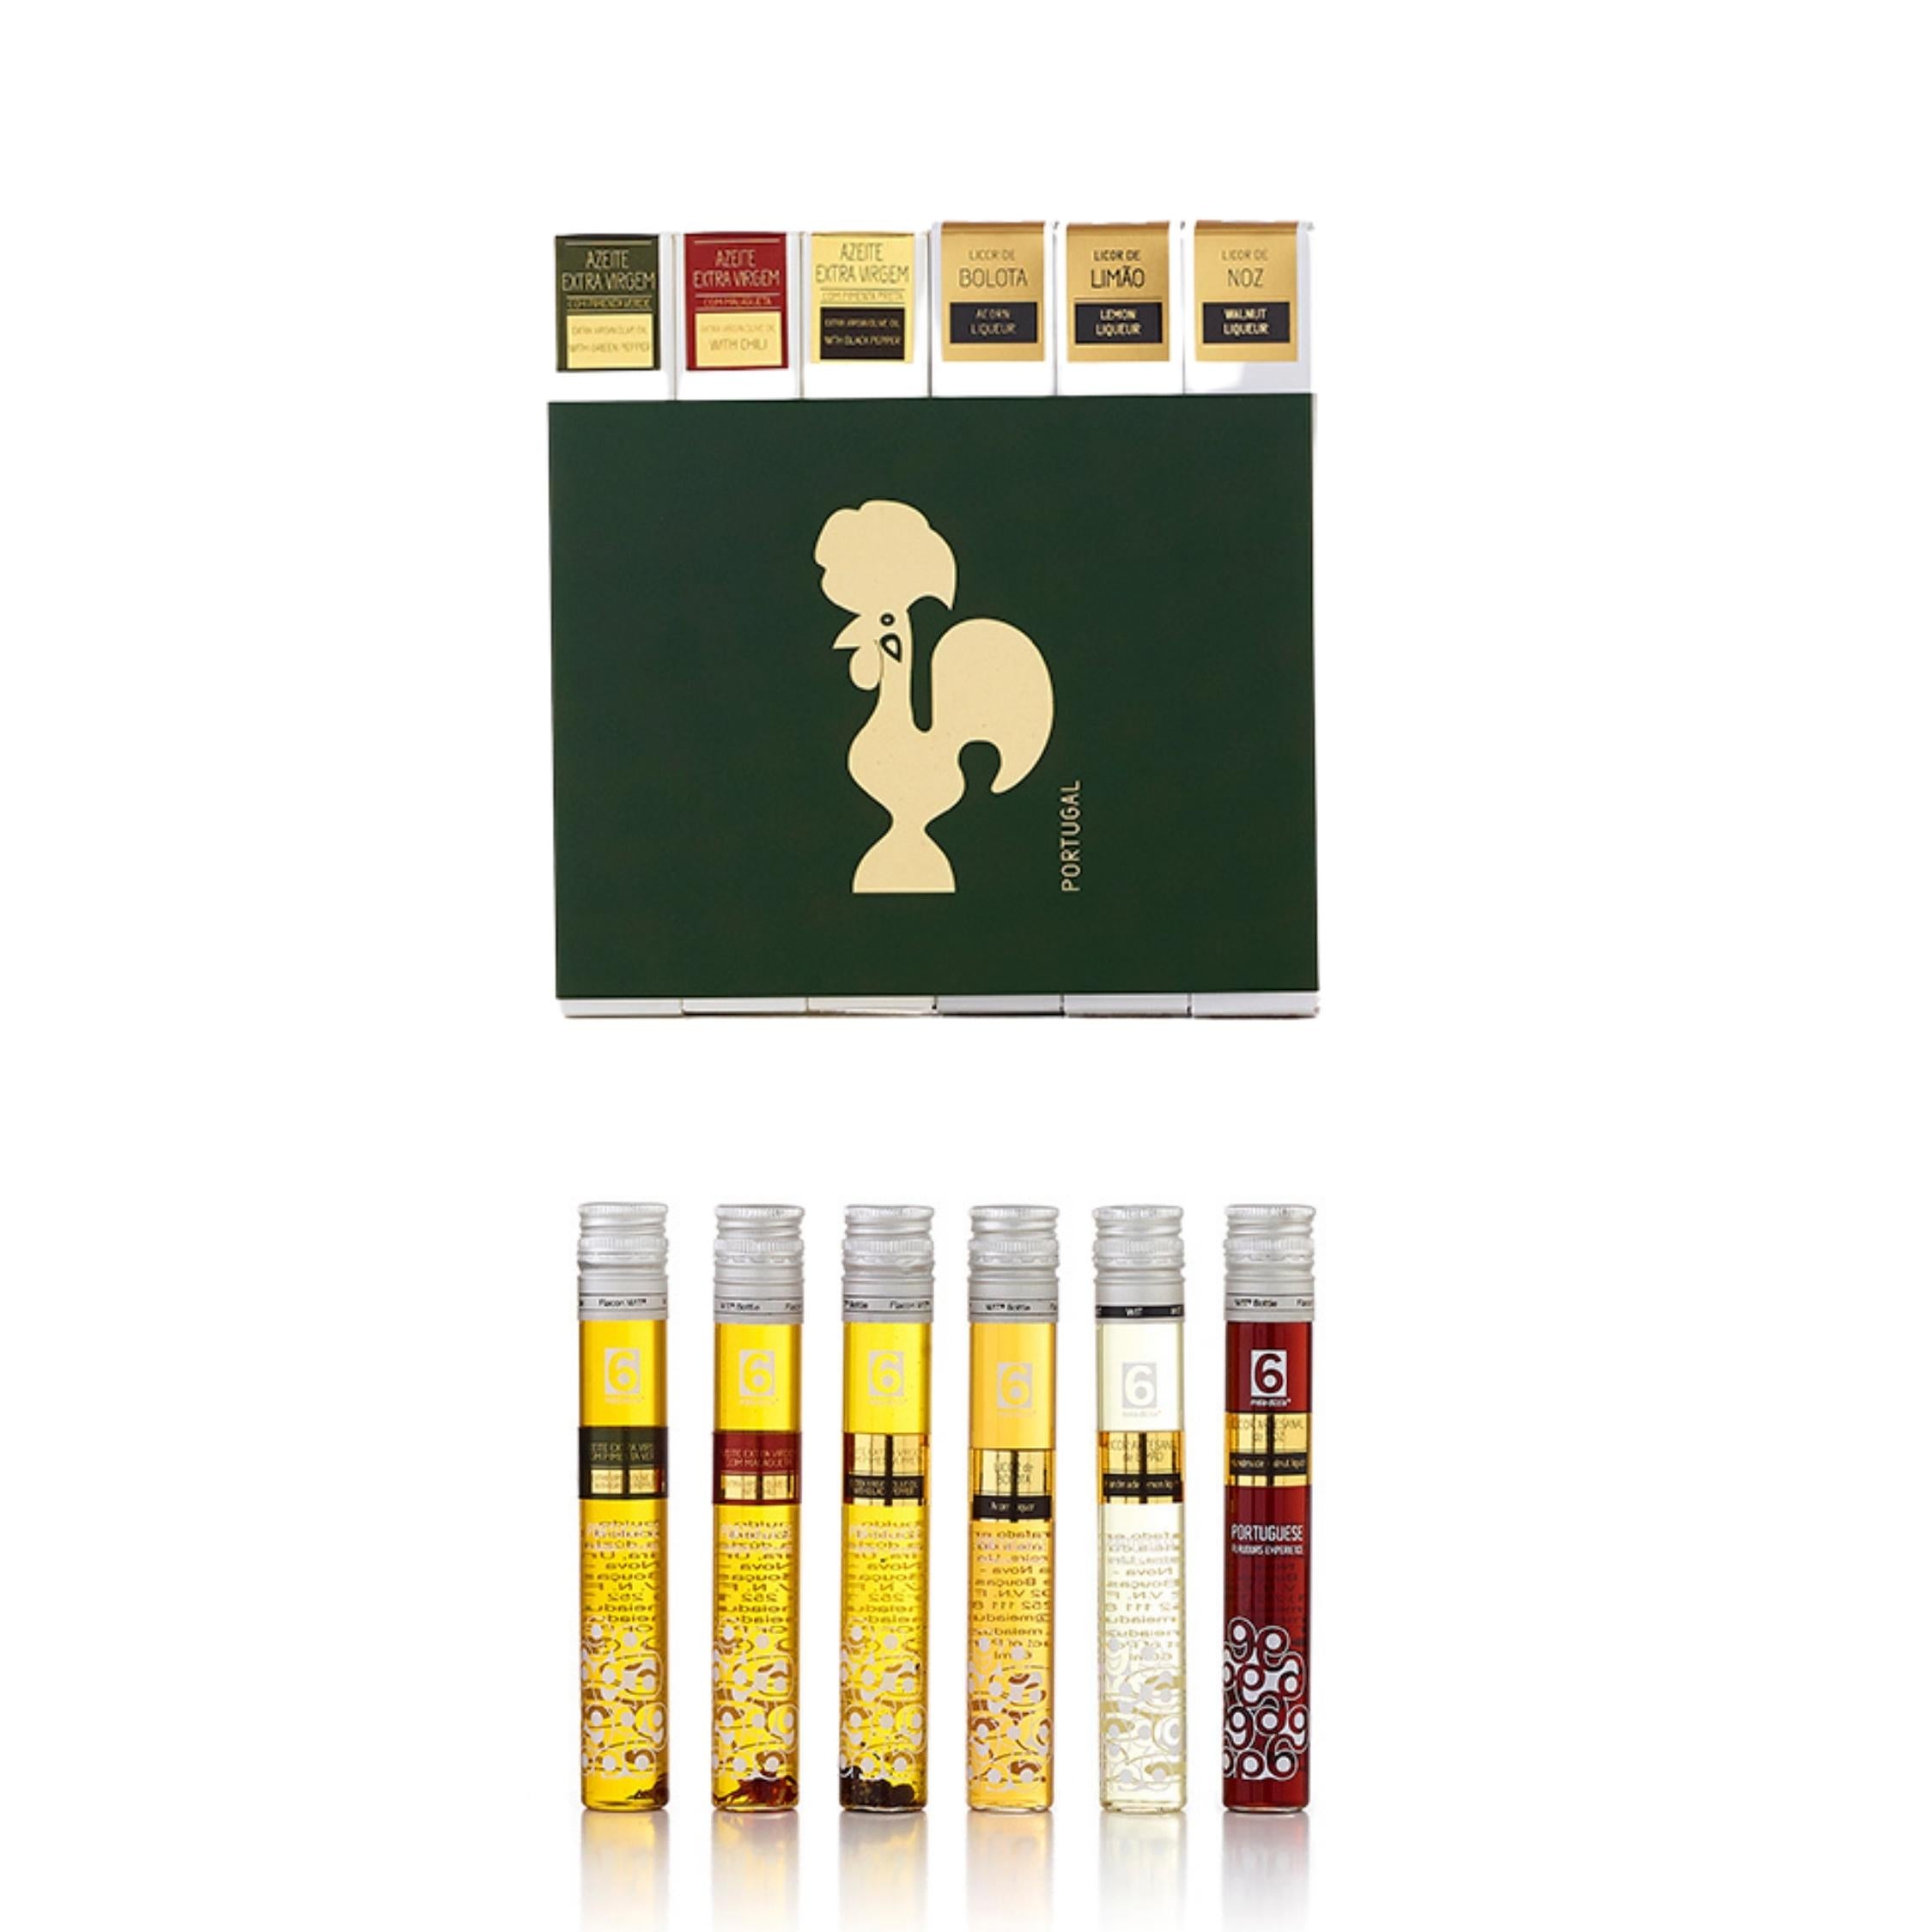 Best Christmas gift for companies under 40€: PACK 6 Liqueurs and Olive Oils - Christmas Special Edition